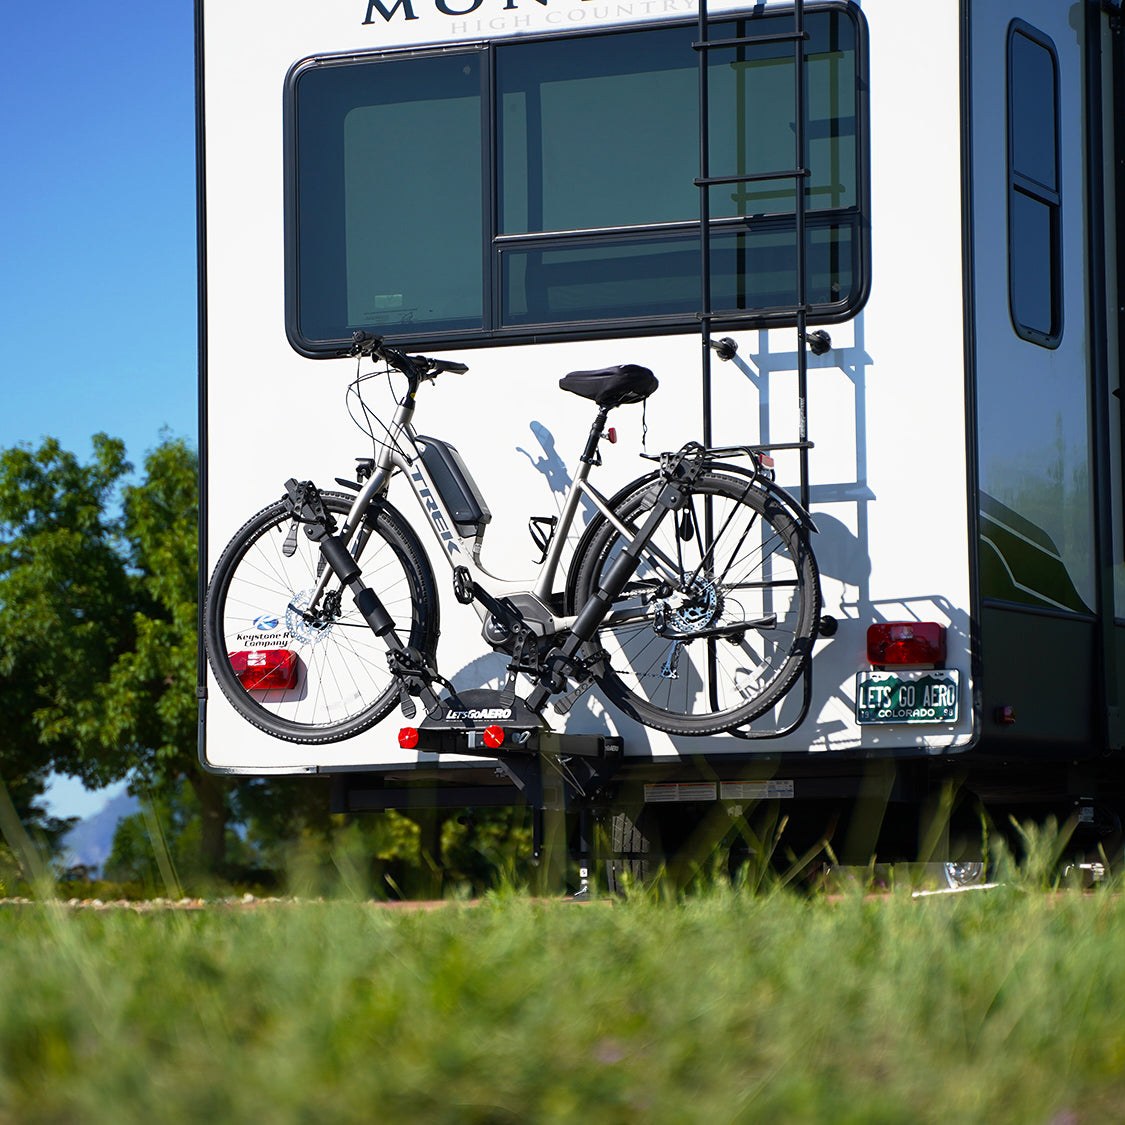 Press Release: 'Travel Trailer Approved' V-lectric E-Bike Carriers from Let's Go Aero are back with all-new PRO improvements